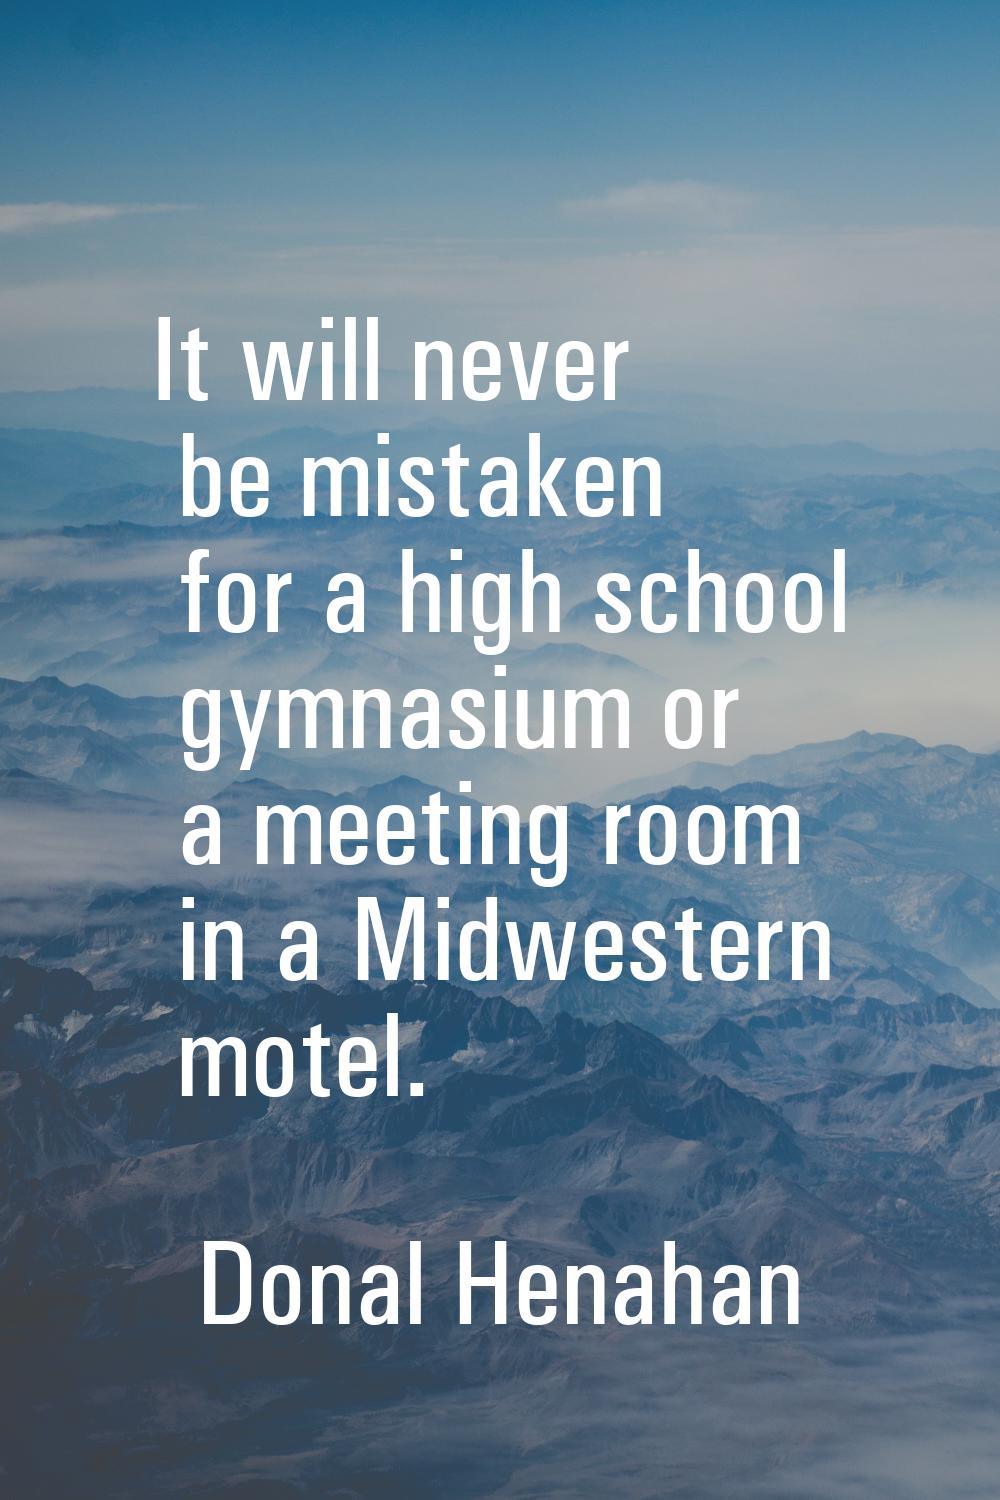 It will never be mistaken for a high school gymnasium or a meeting room in a Midwestern motel.